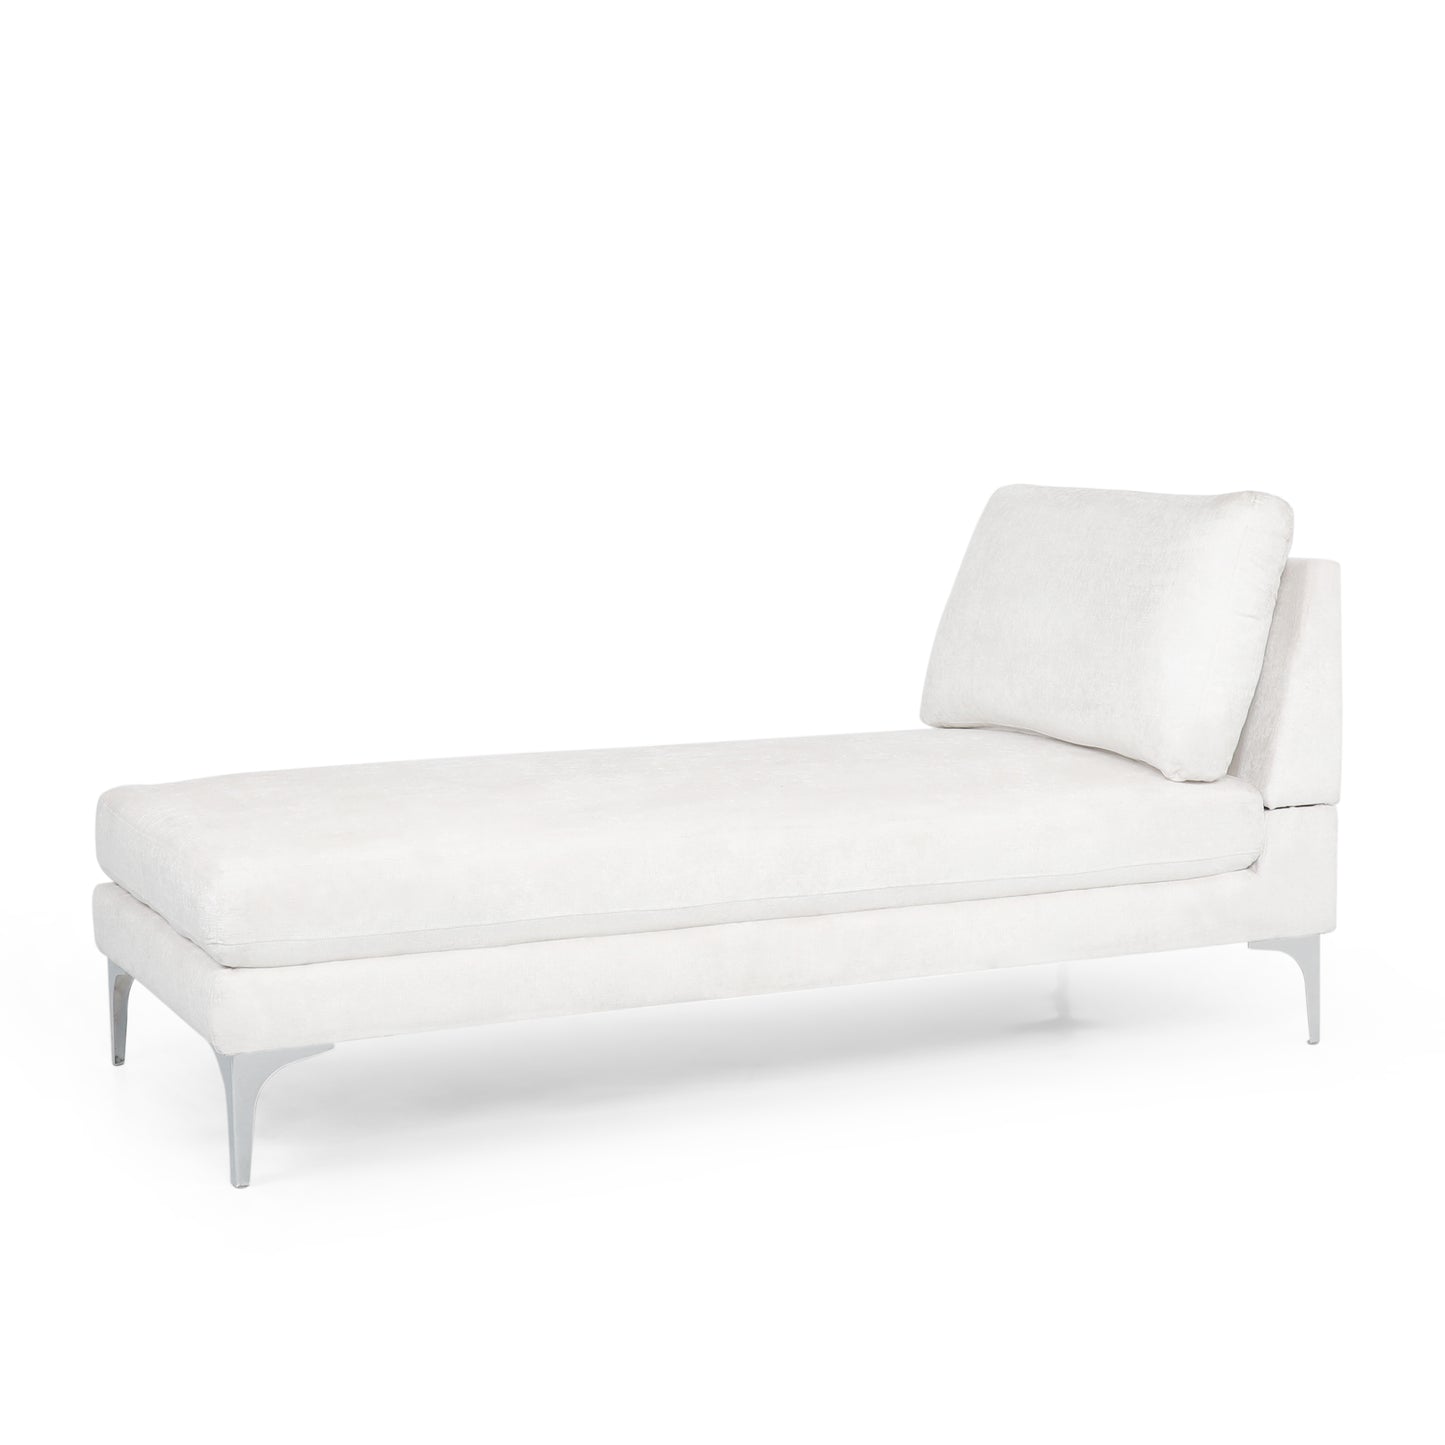 Makenleigh Contemporary Fabric Chaise Lounge